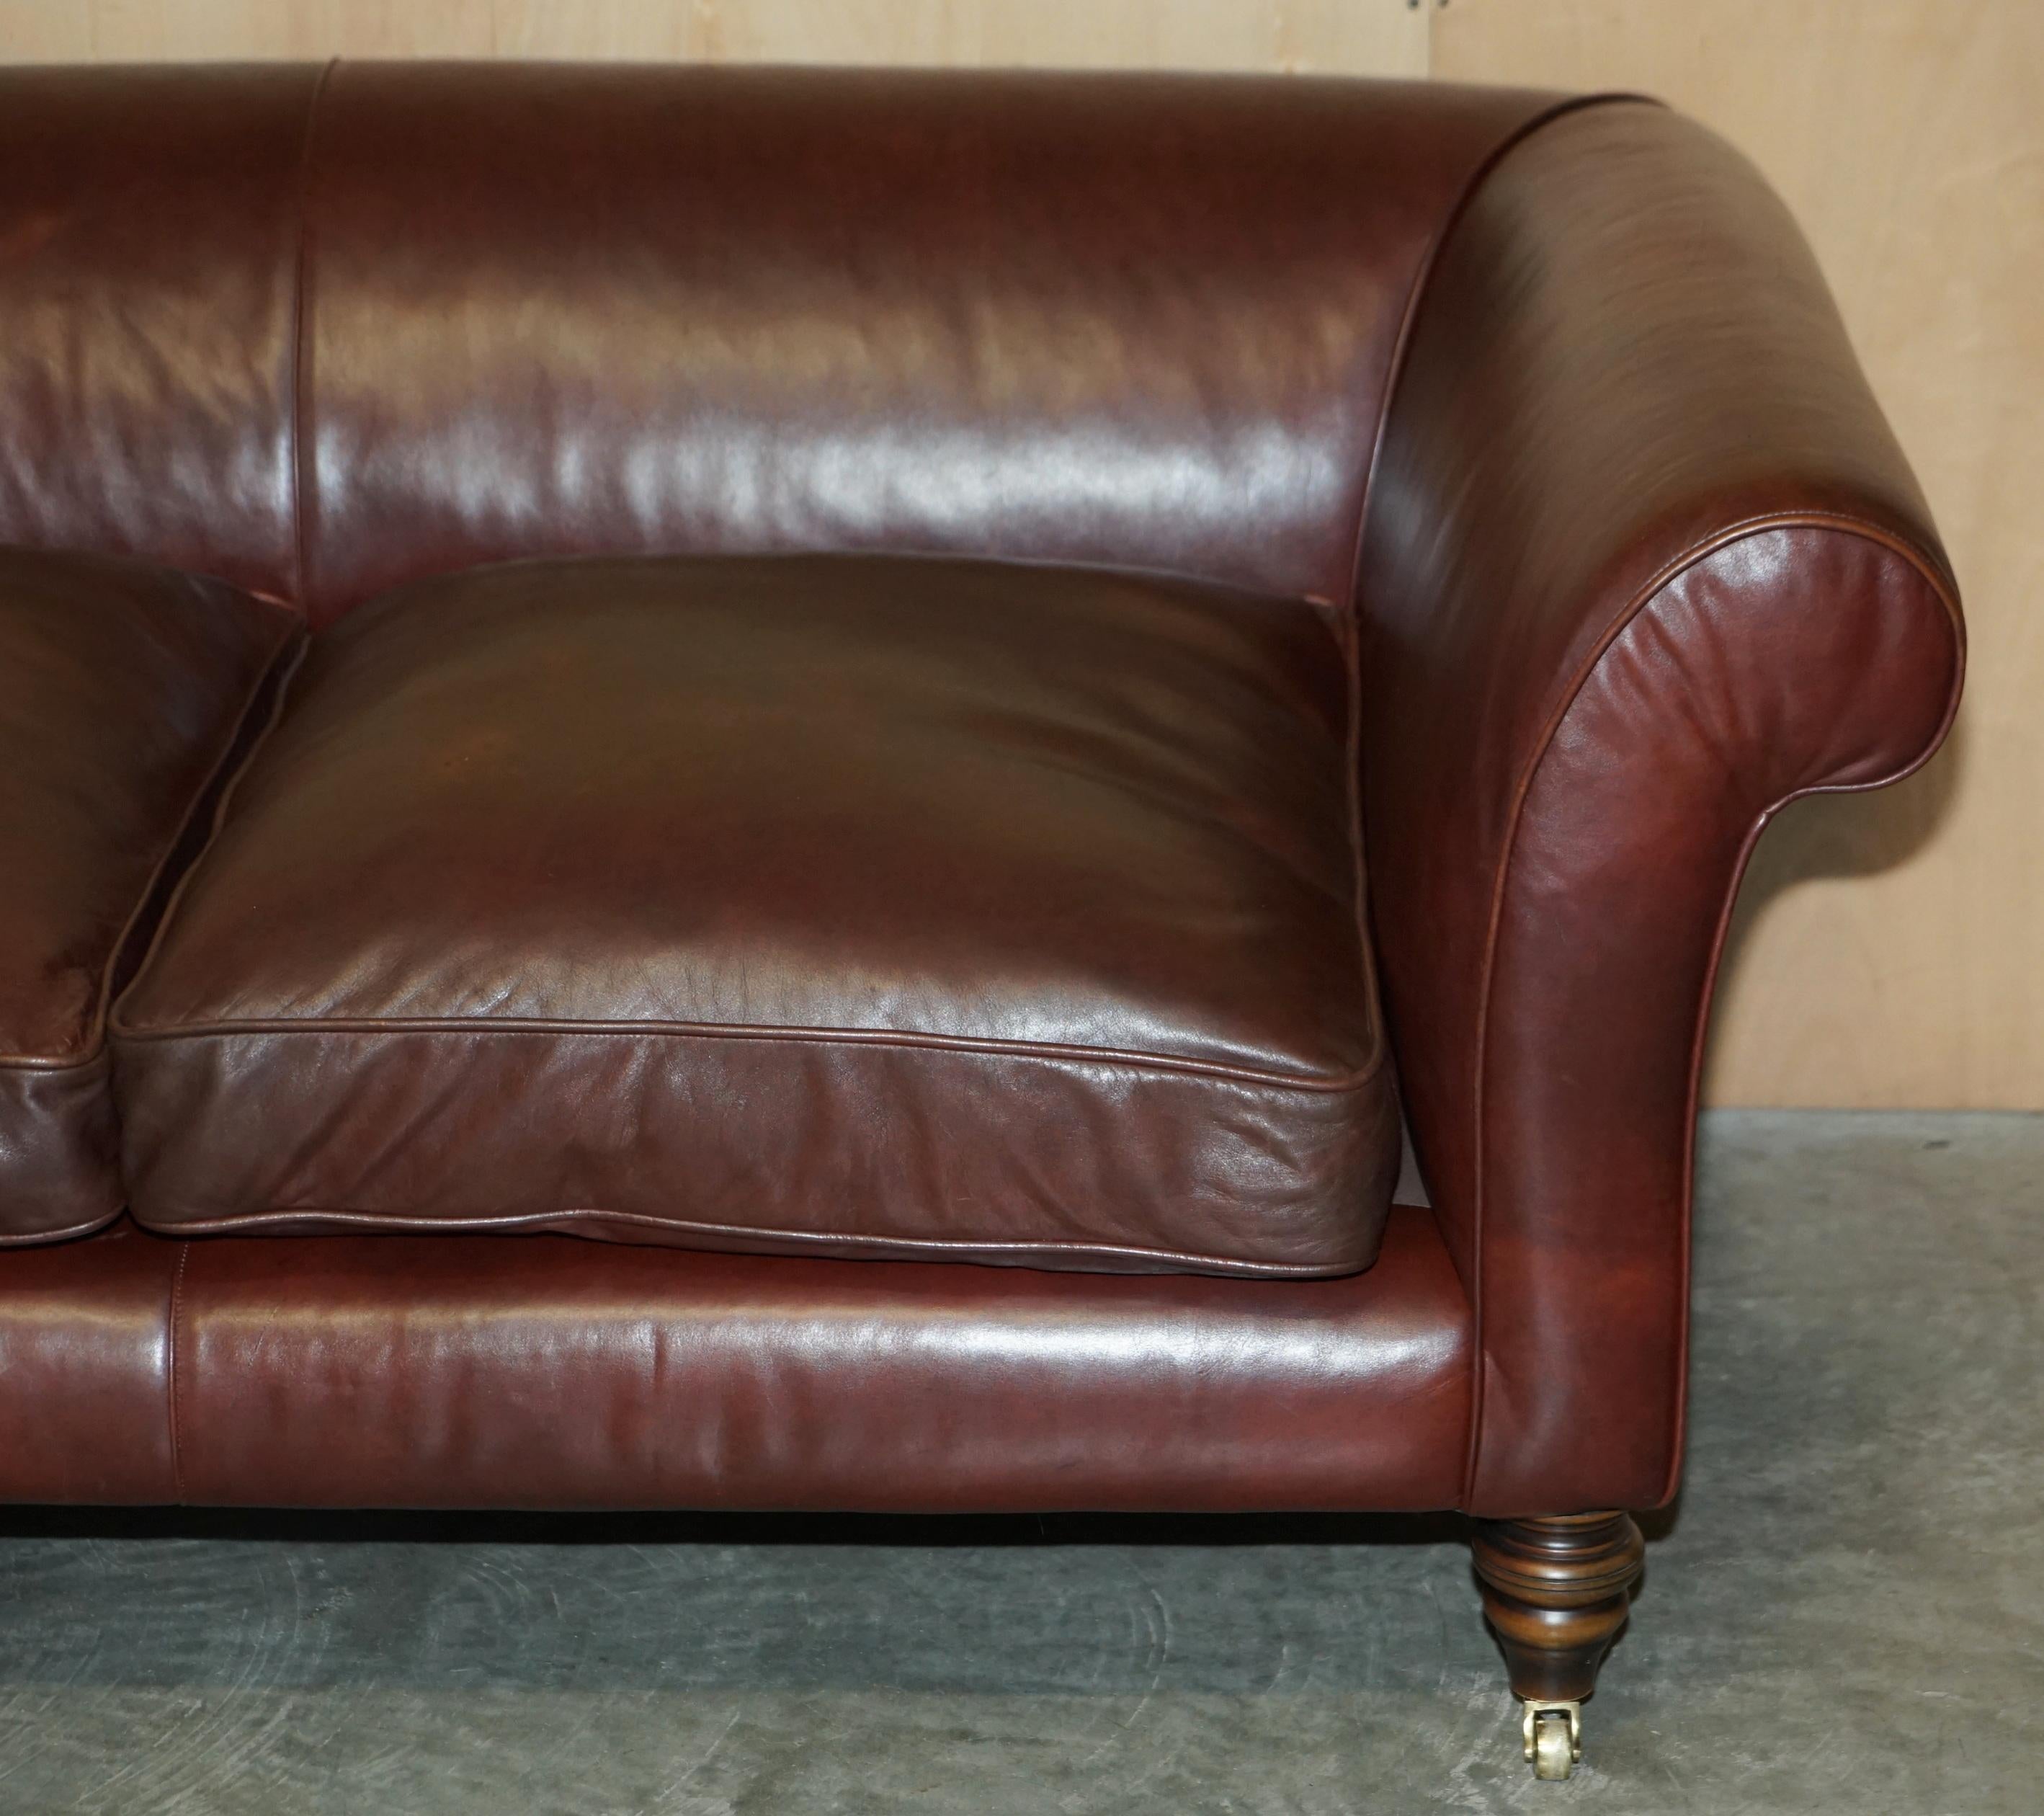 Anglais ViNTAGE DYED BROWN LEATHER ART DECO THREE SEAT SOFA FEATHER FILLED SEAT en vente